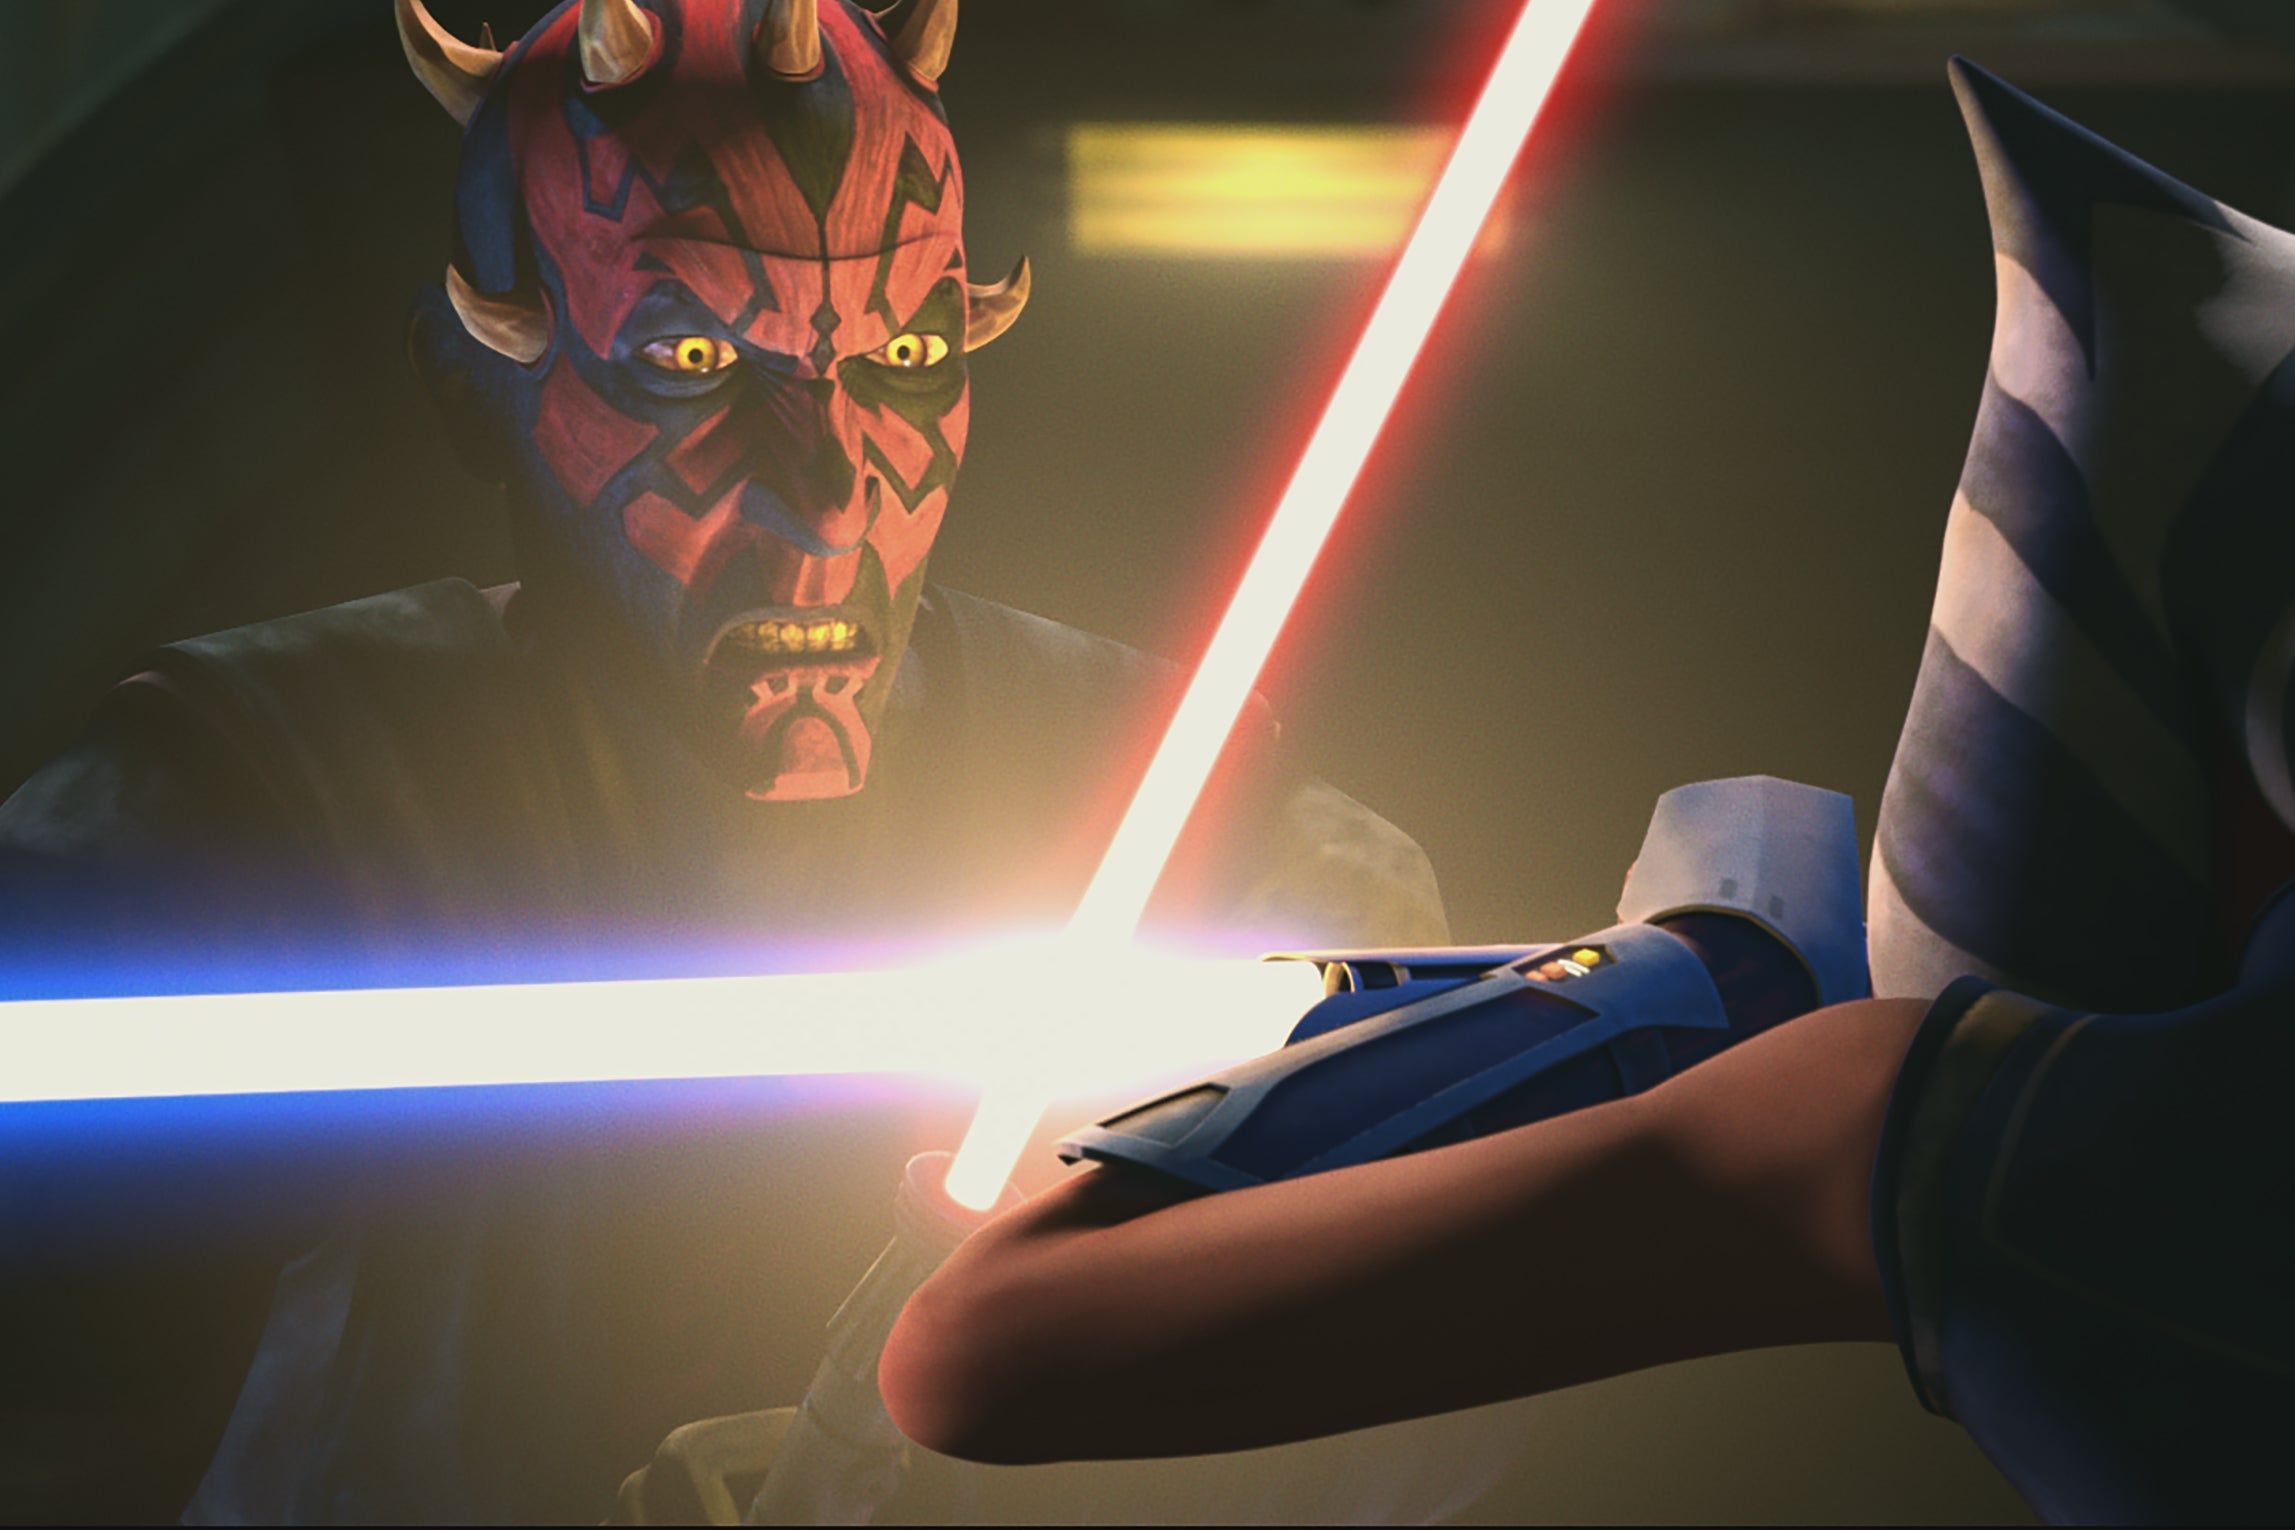 In a 3D-animated style, Darth Maul, with a red and black face and horns, crosses lightsabers with Ahsoka Tano, seen from the back.